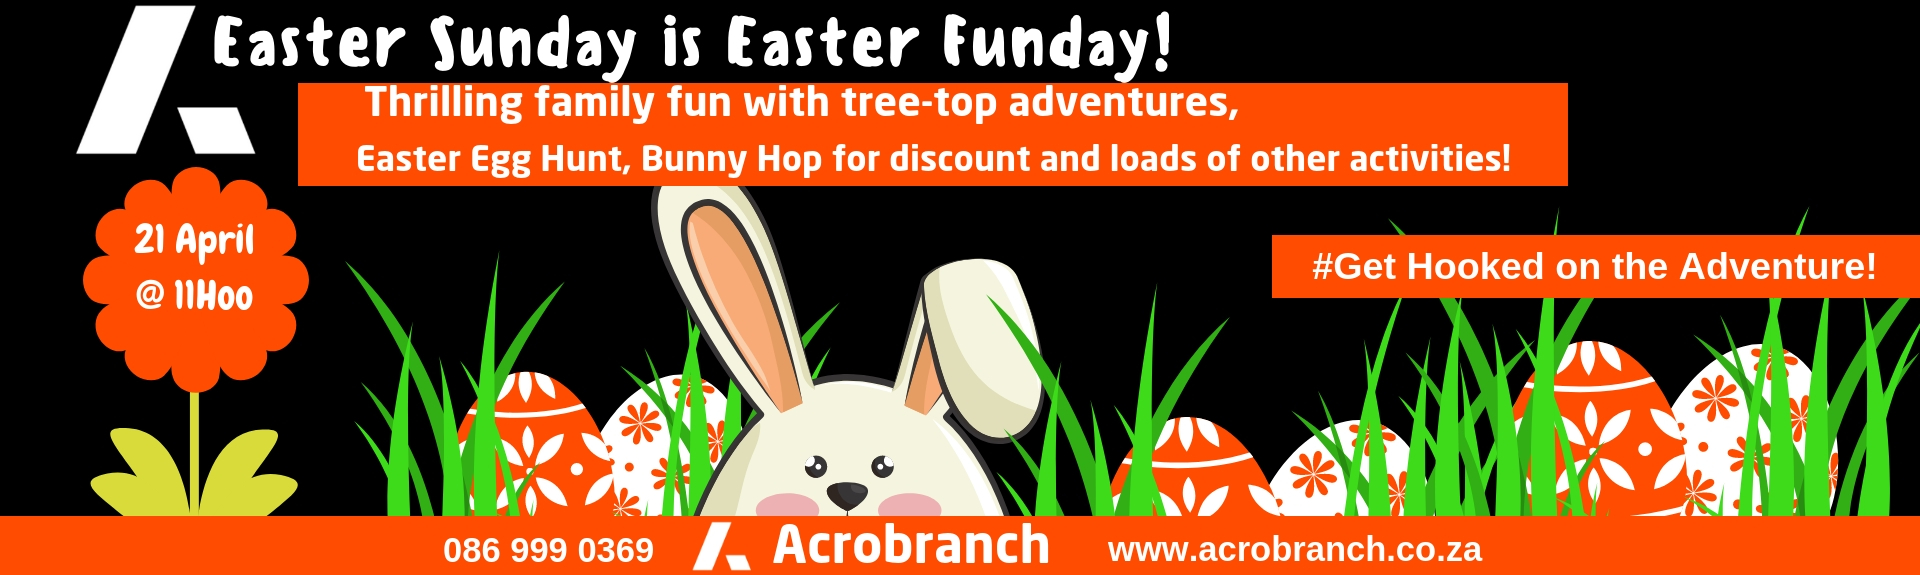 Acrobranch Easter Sunday Funday!